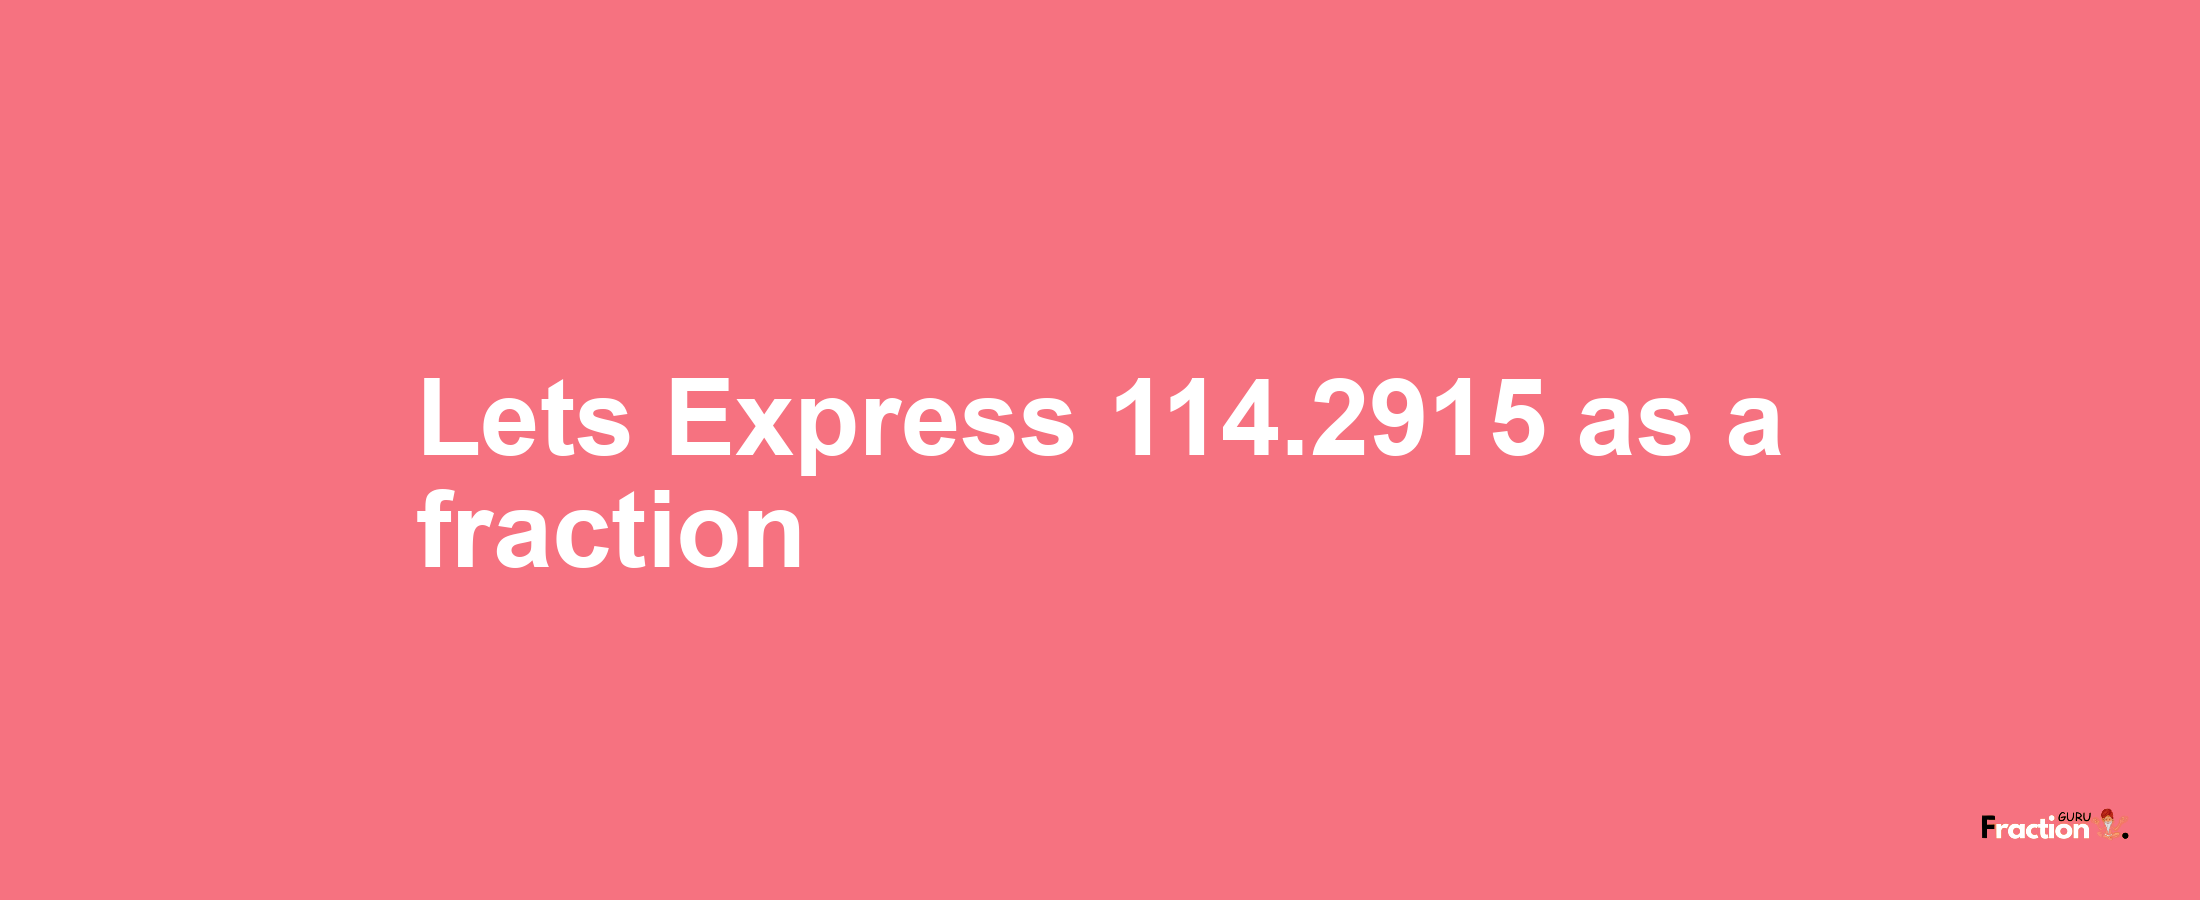 Lets Express 114.2915 as afraction